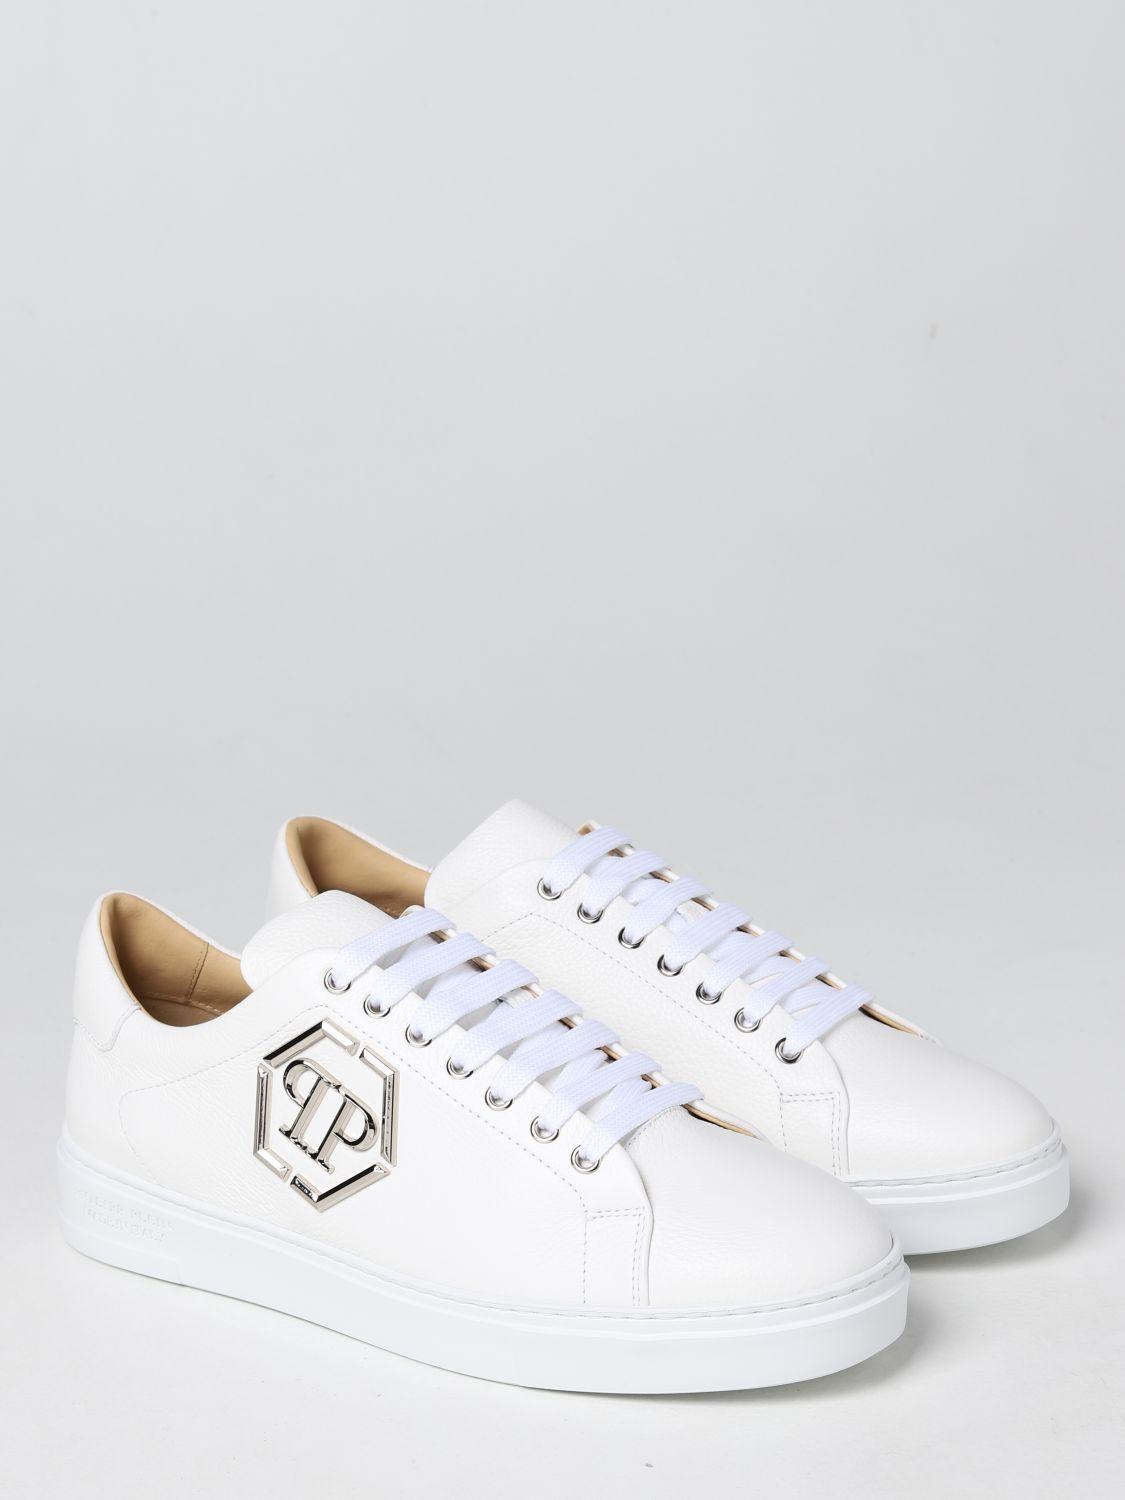 Philipp Plein Sneakers In Grained Leather in White for Men | Lyst